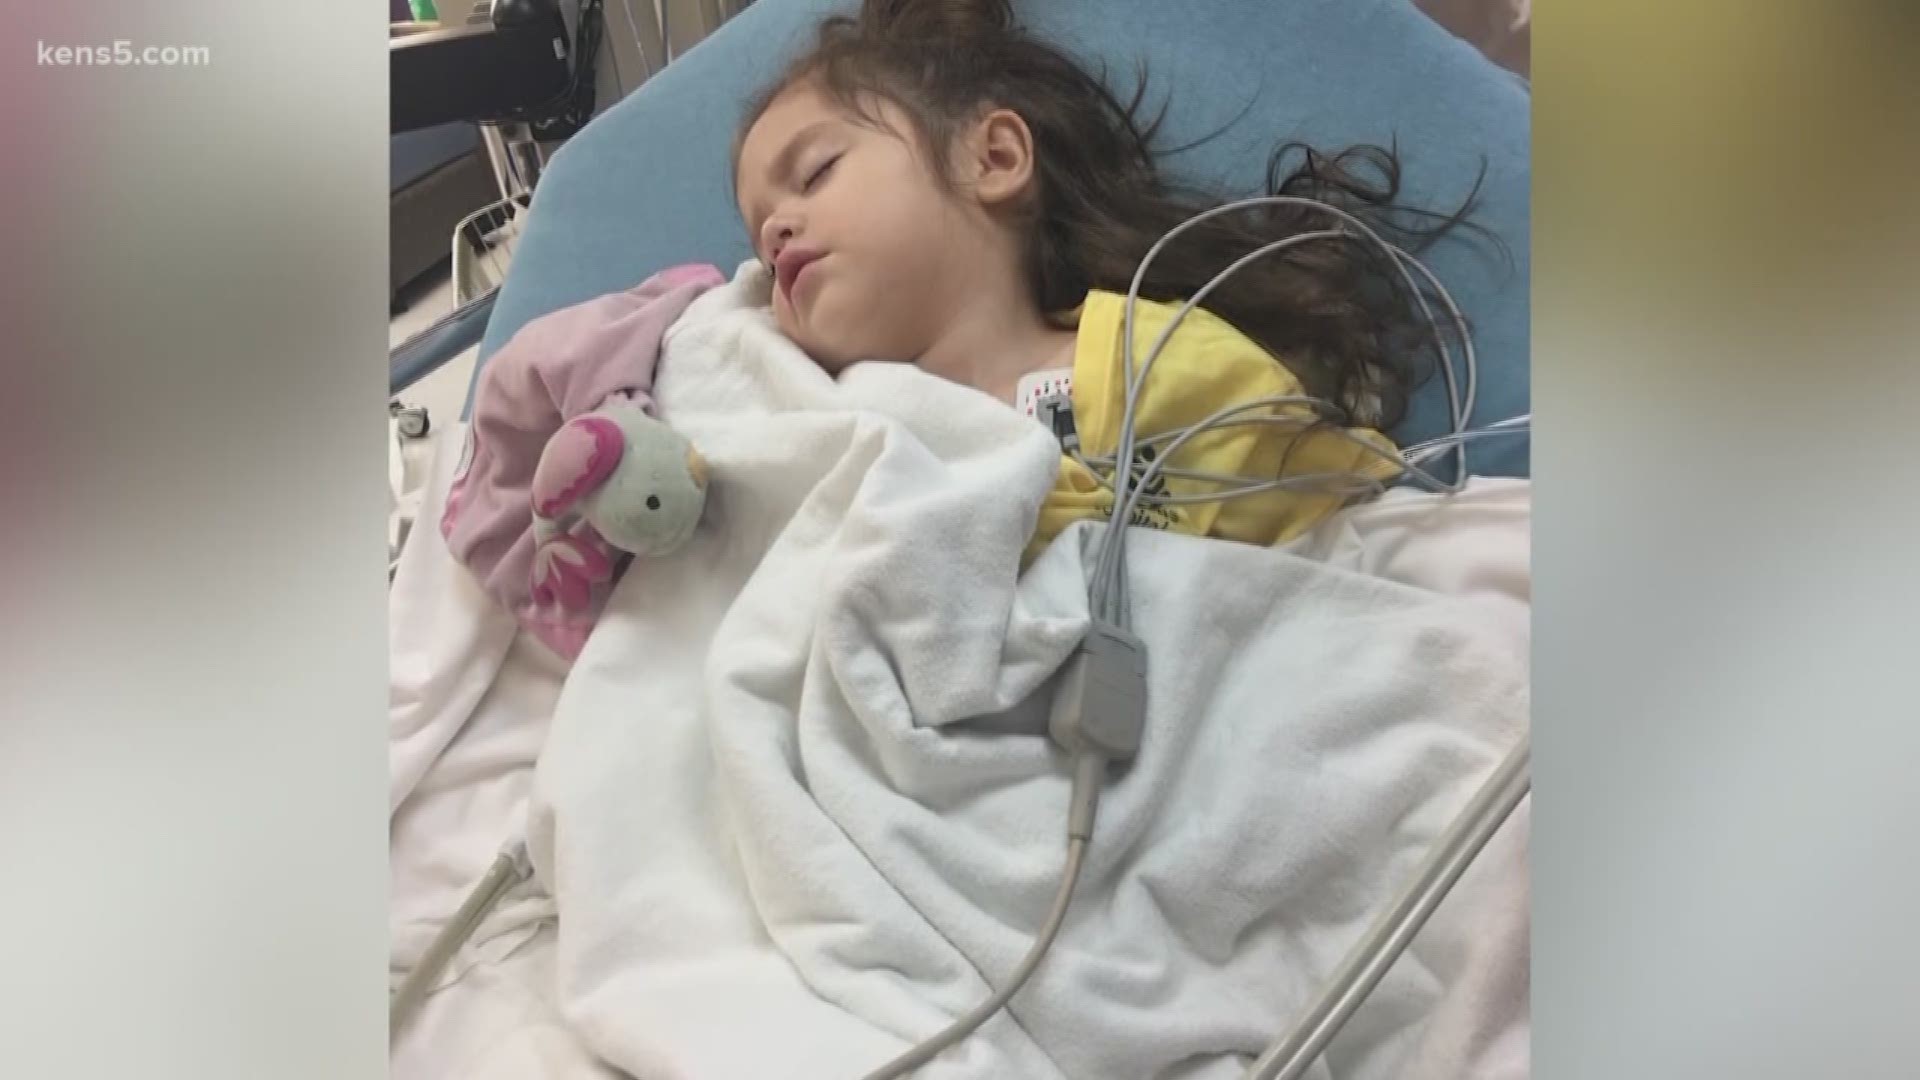 A San Antonio family is spreading awareness about childhood cancer after they snapped a photo of their youngest daughter and notice something was not right.